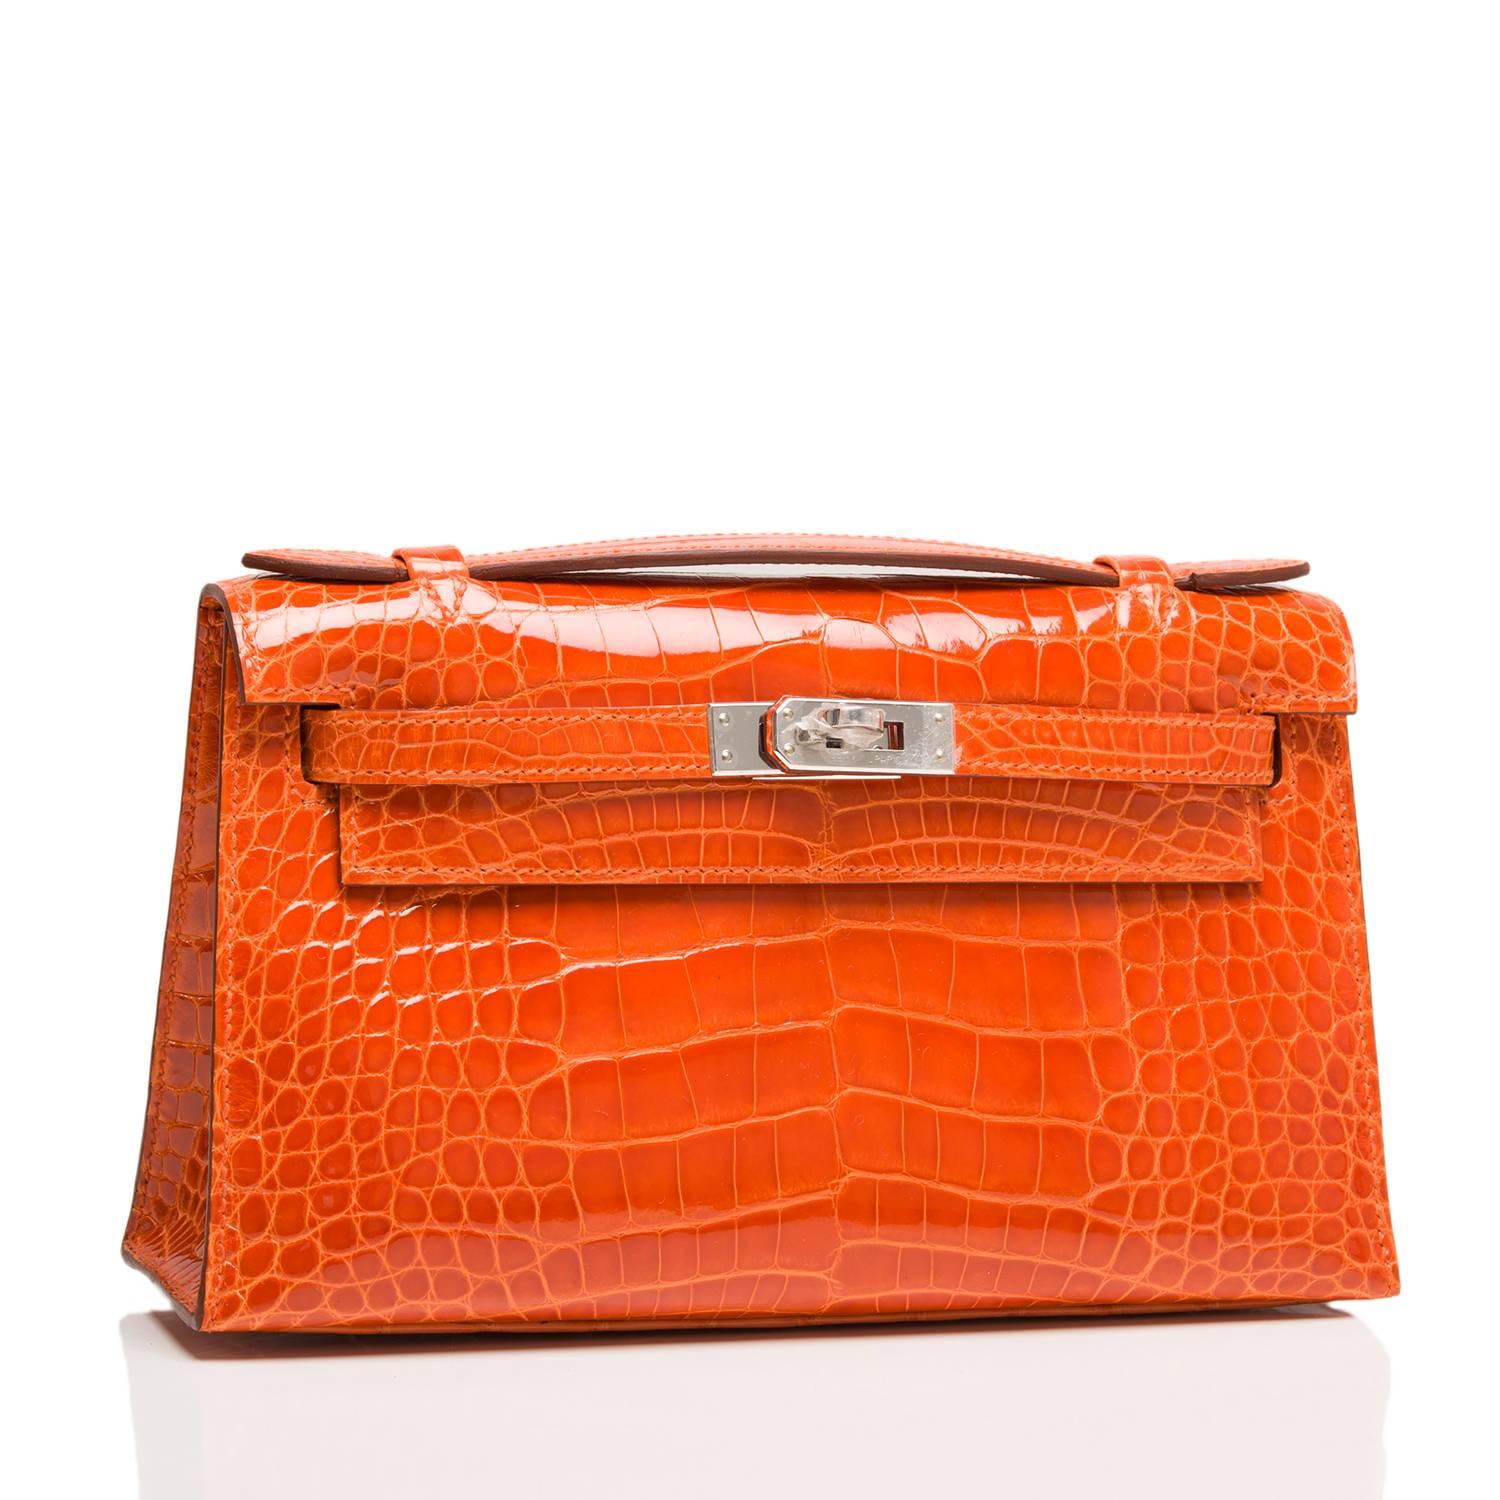  	
Hermes Orange H Shiny Alligator Mini Kelly Pochette clutch with palladium hardware.

This Hermes Kelly Pochette features tonal stitching, a front flap with two straps, toggle closure and single flat handle.

The interior is lined in Orange H